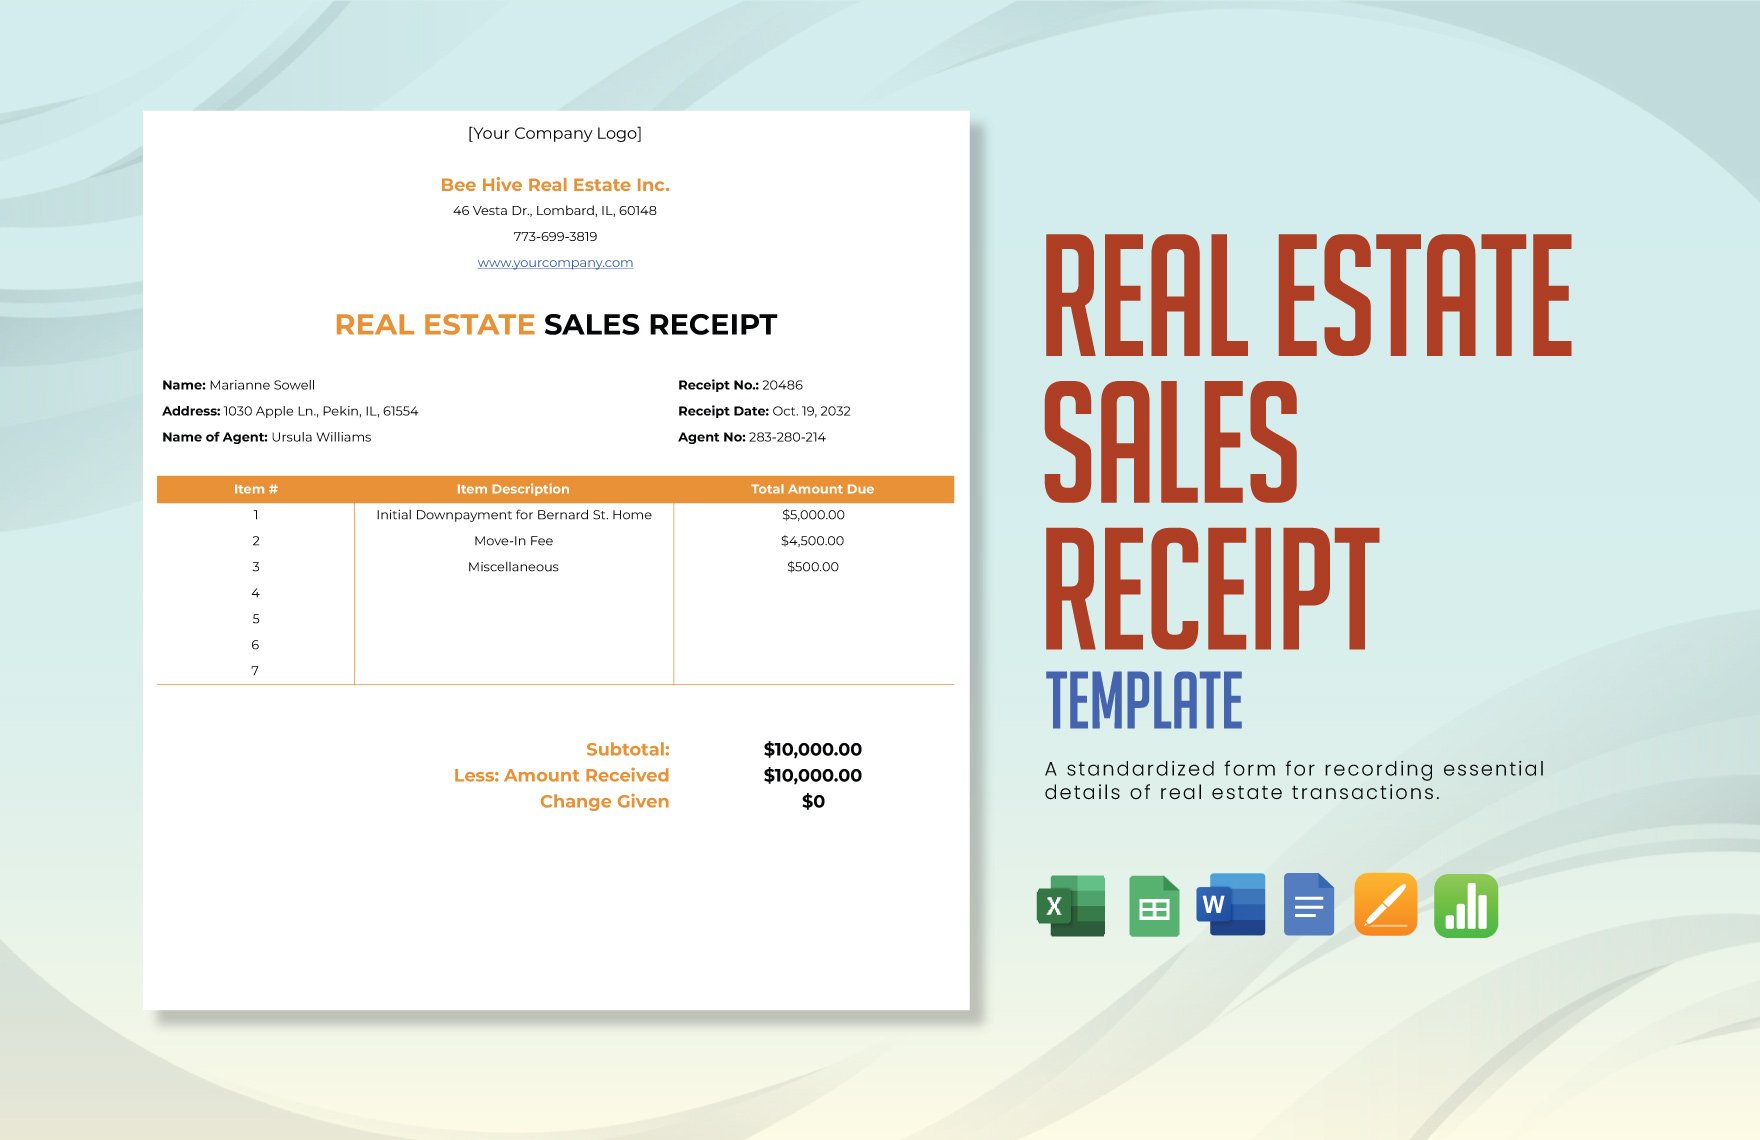 Real Estate Sales Receipt Template in Word, Google Docs, Excel, Google Sheets, Apple Pages, Apple Numbers